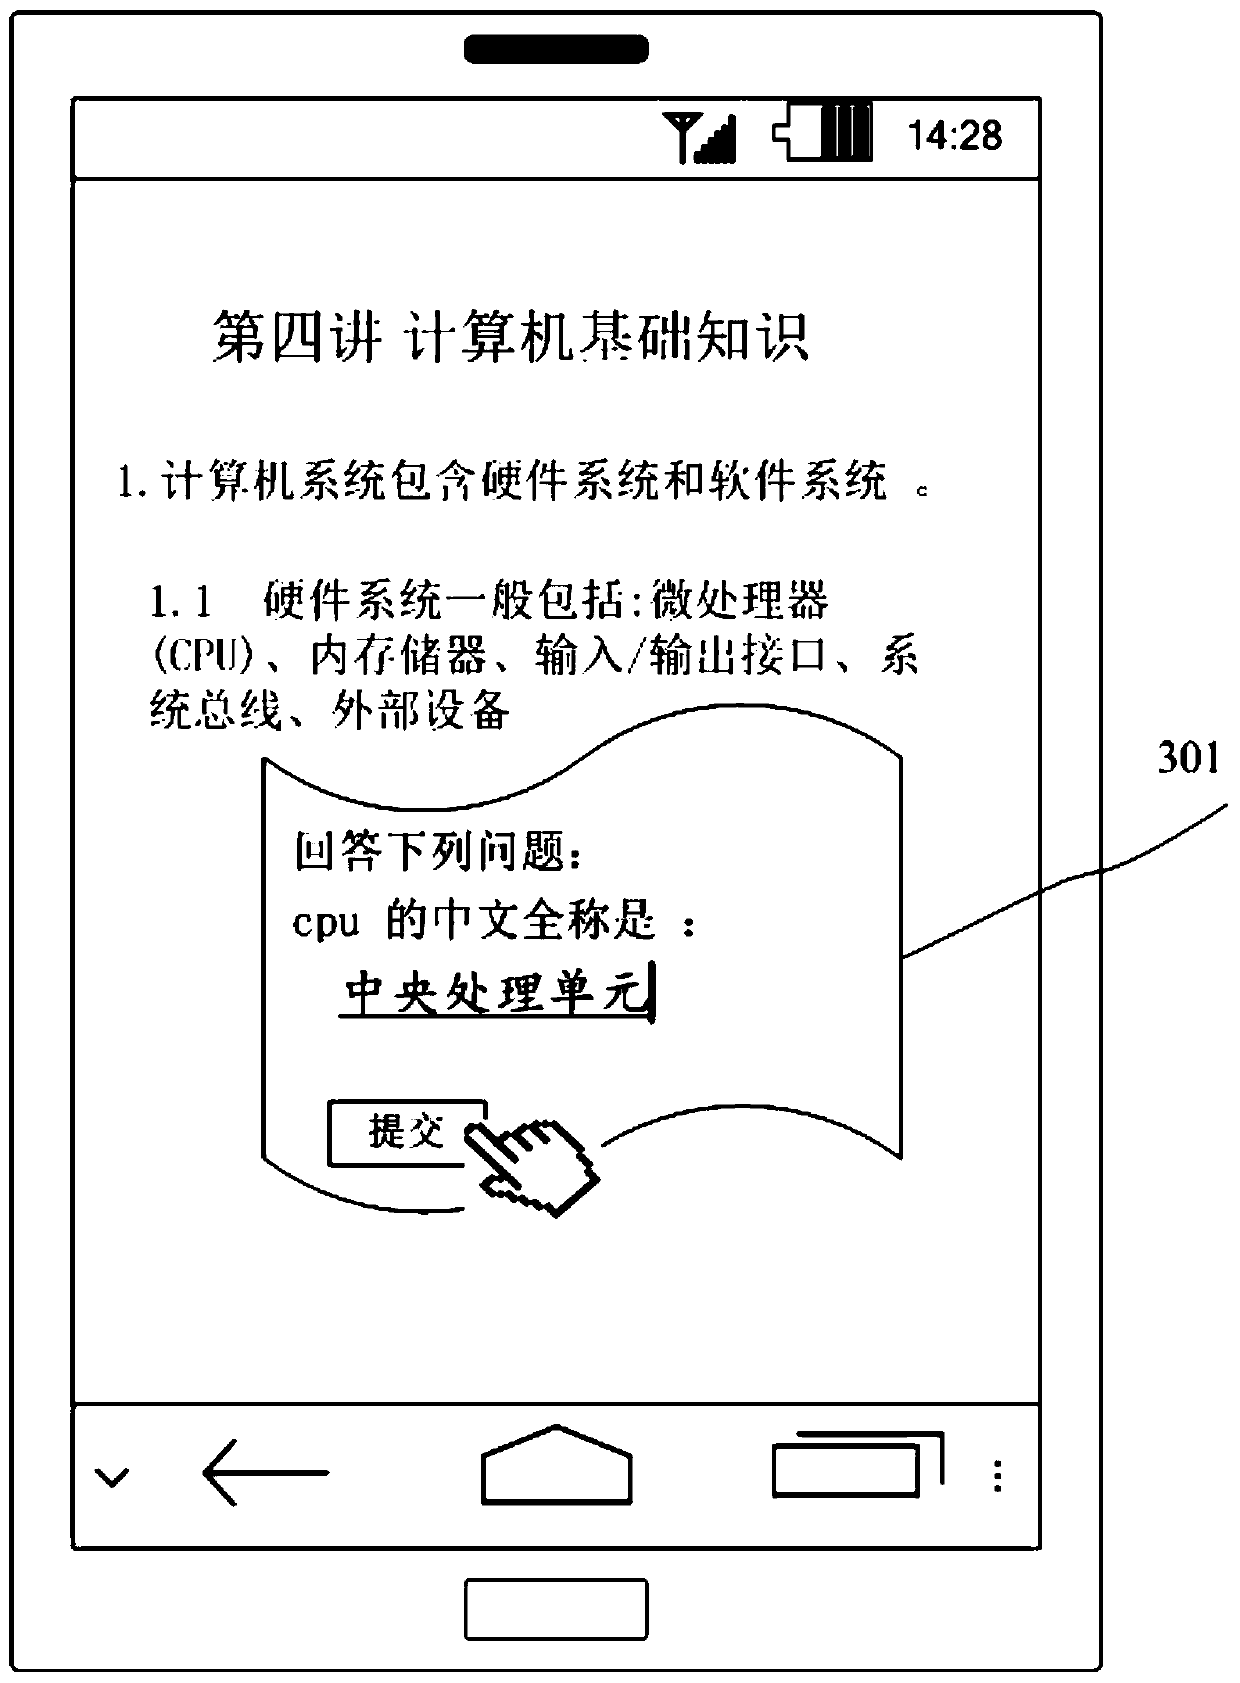 Remote user attention evaluation method and system based on multi-modal interaction